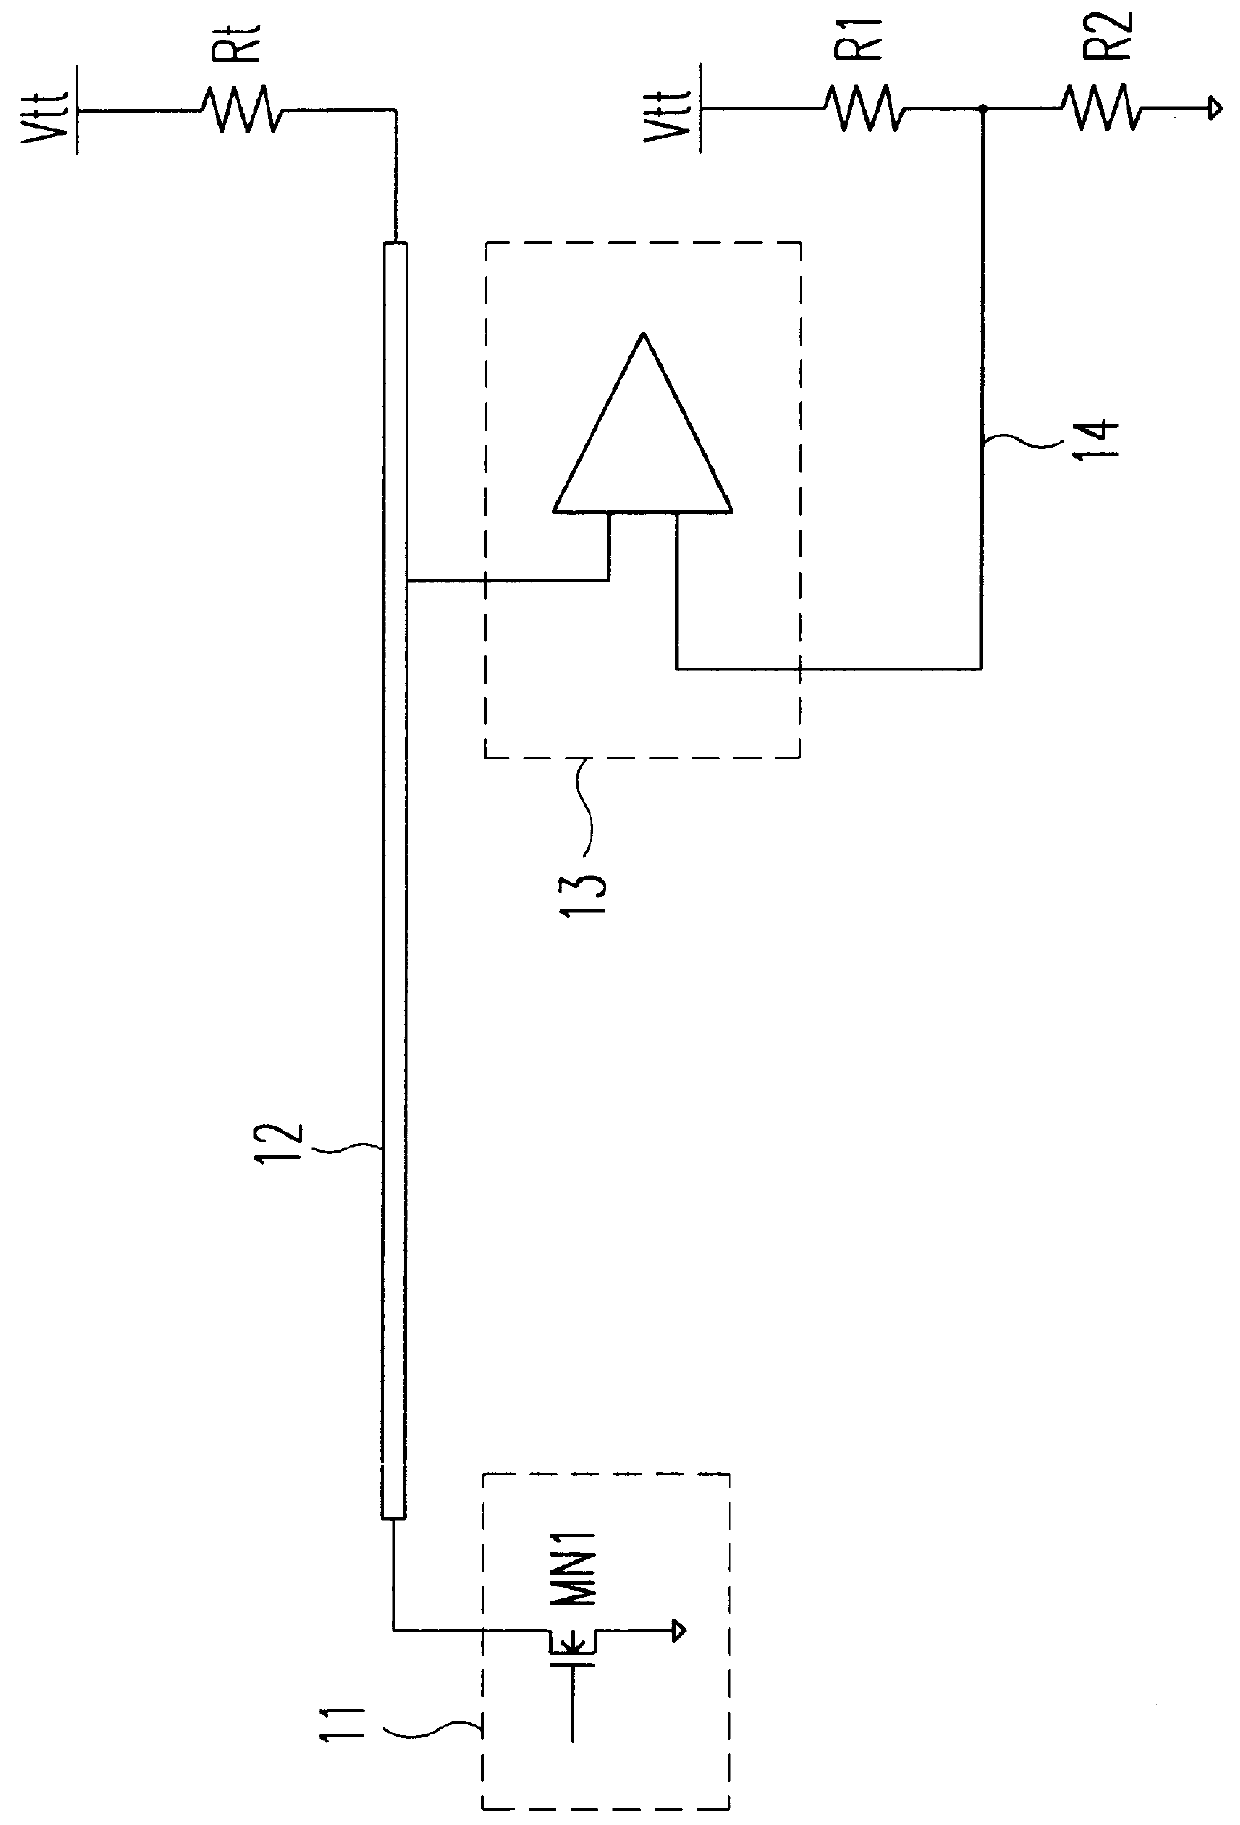 Bus interface circuit in a semiconductor memory device